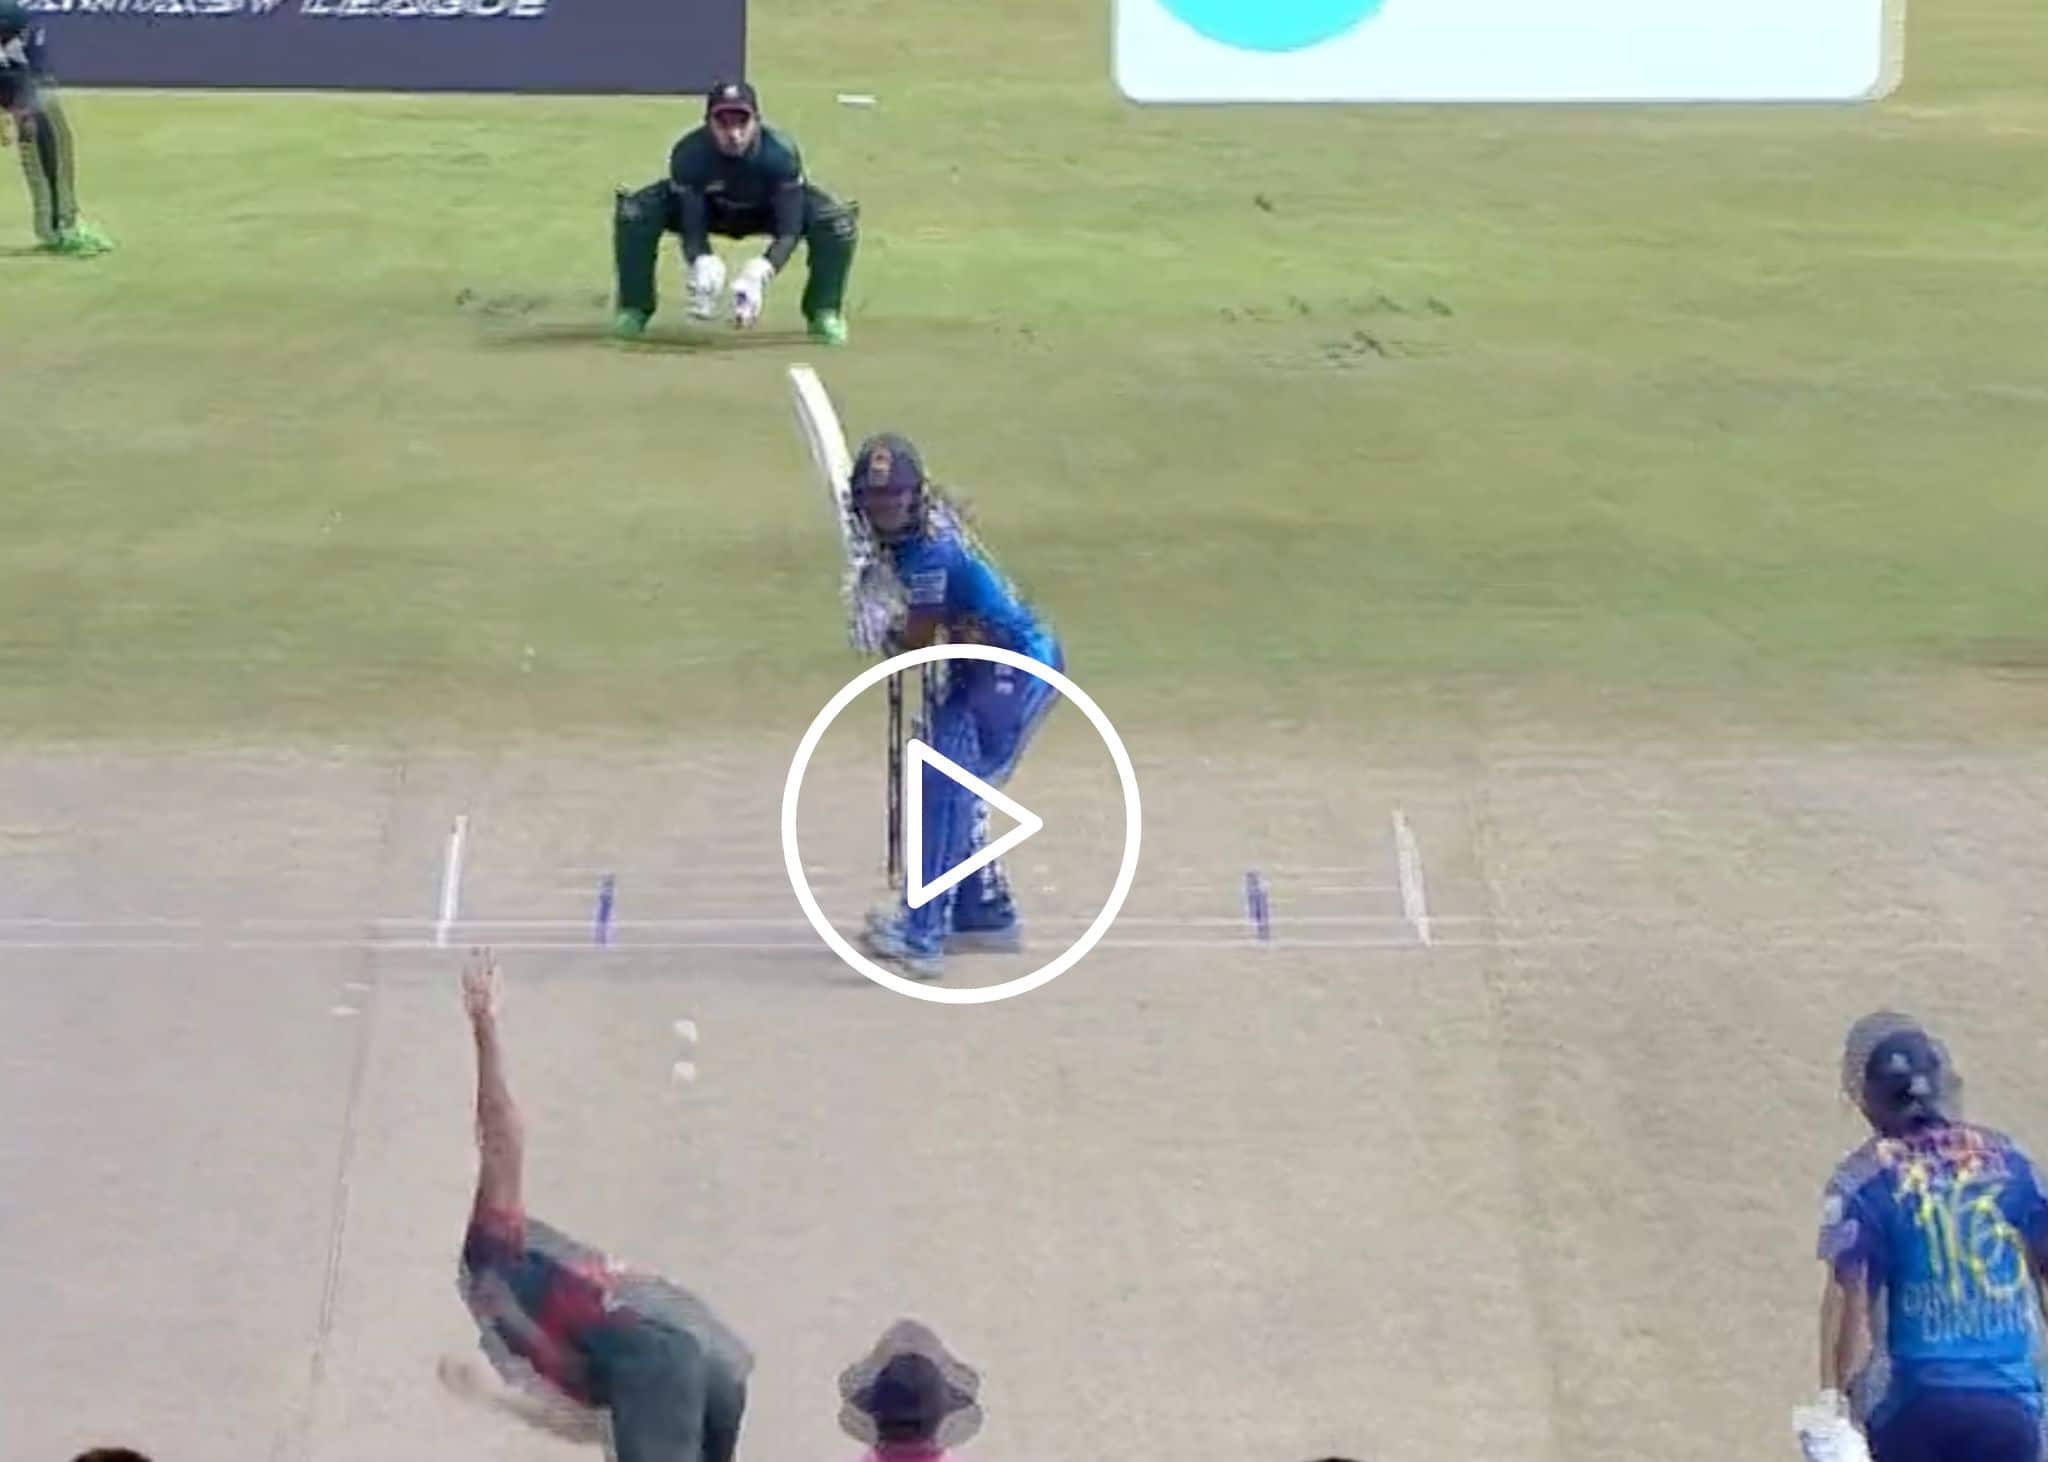 [Watch] Pathum Nissanka Hits ‘Picture Perfect’ Cover Drive Against Taskin Ahmed